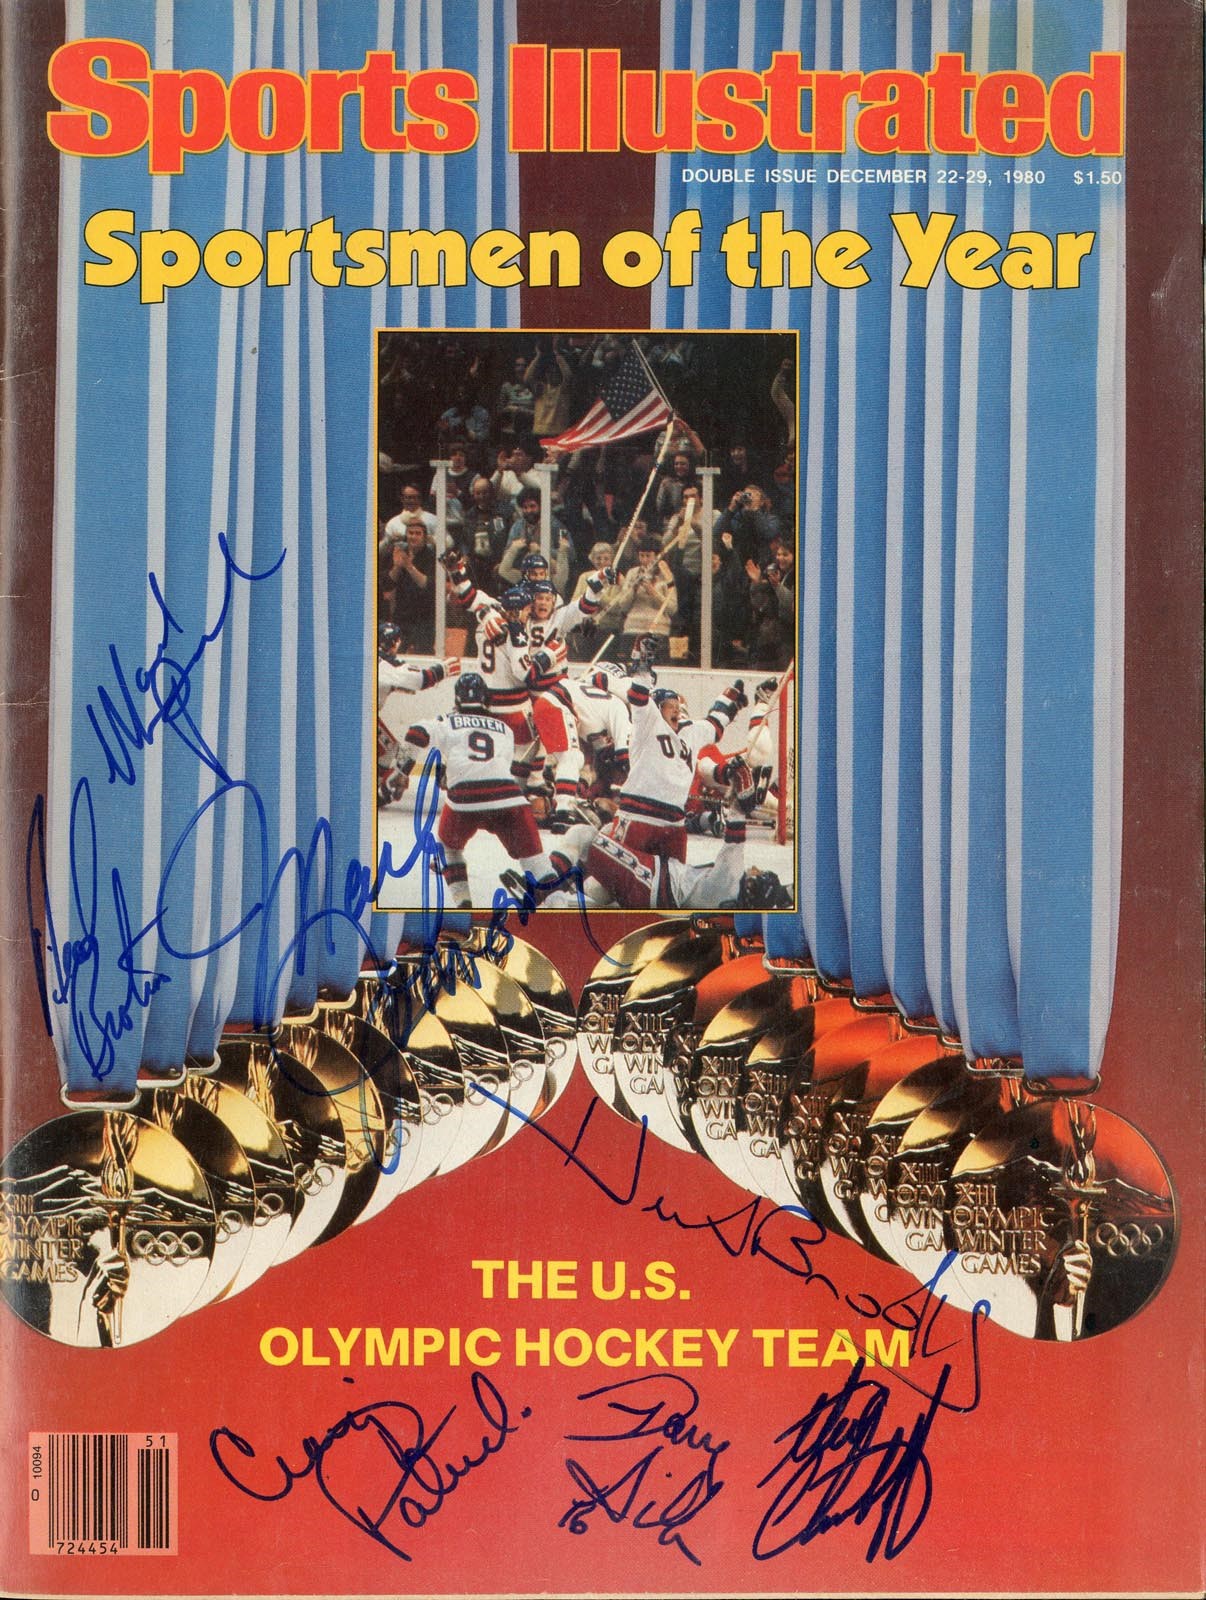 Olympics and All Sports - 1980 USA Hockey "Miracle" Team Signed Sports Illustrated & Book - Both with Herb Brooks